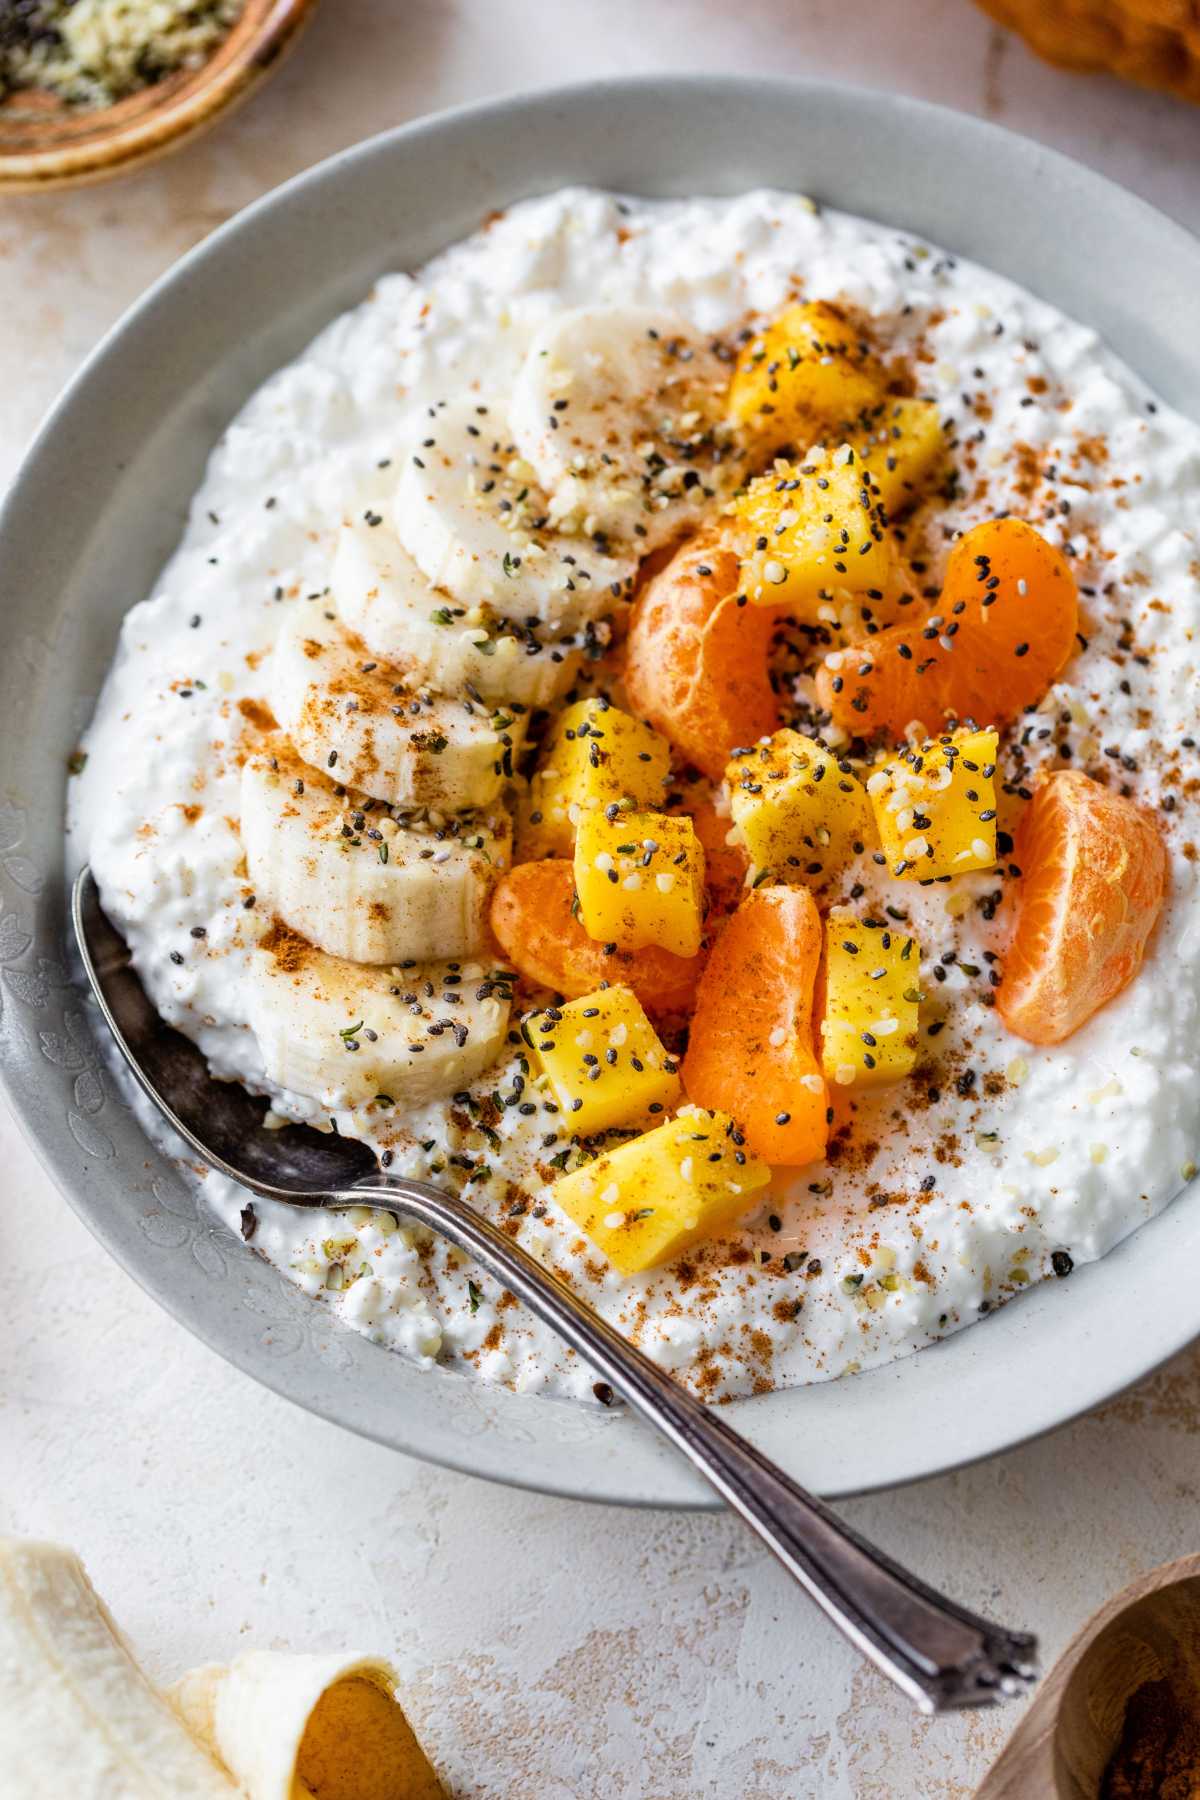 Cottage cheese breakfast bowl topped with banana slices, chopped mango and seeds.